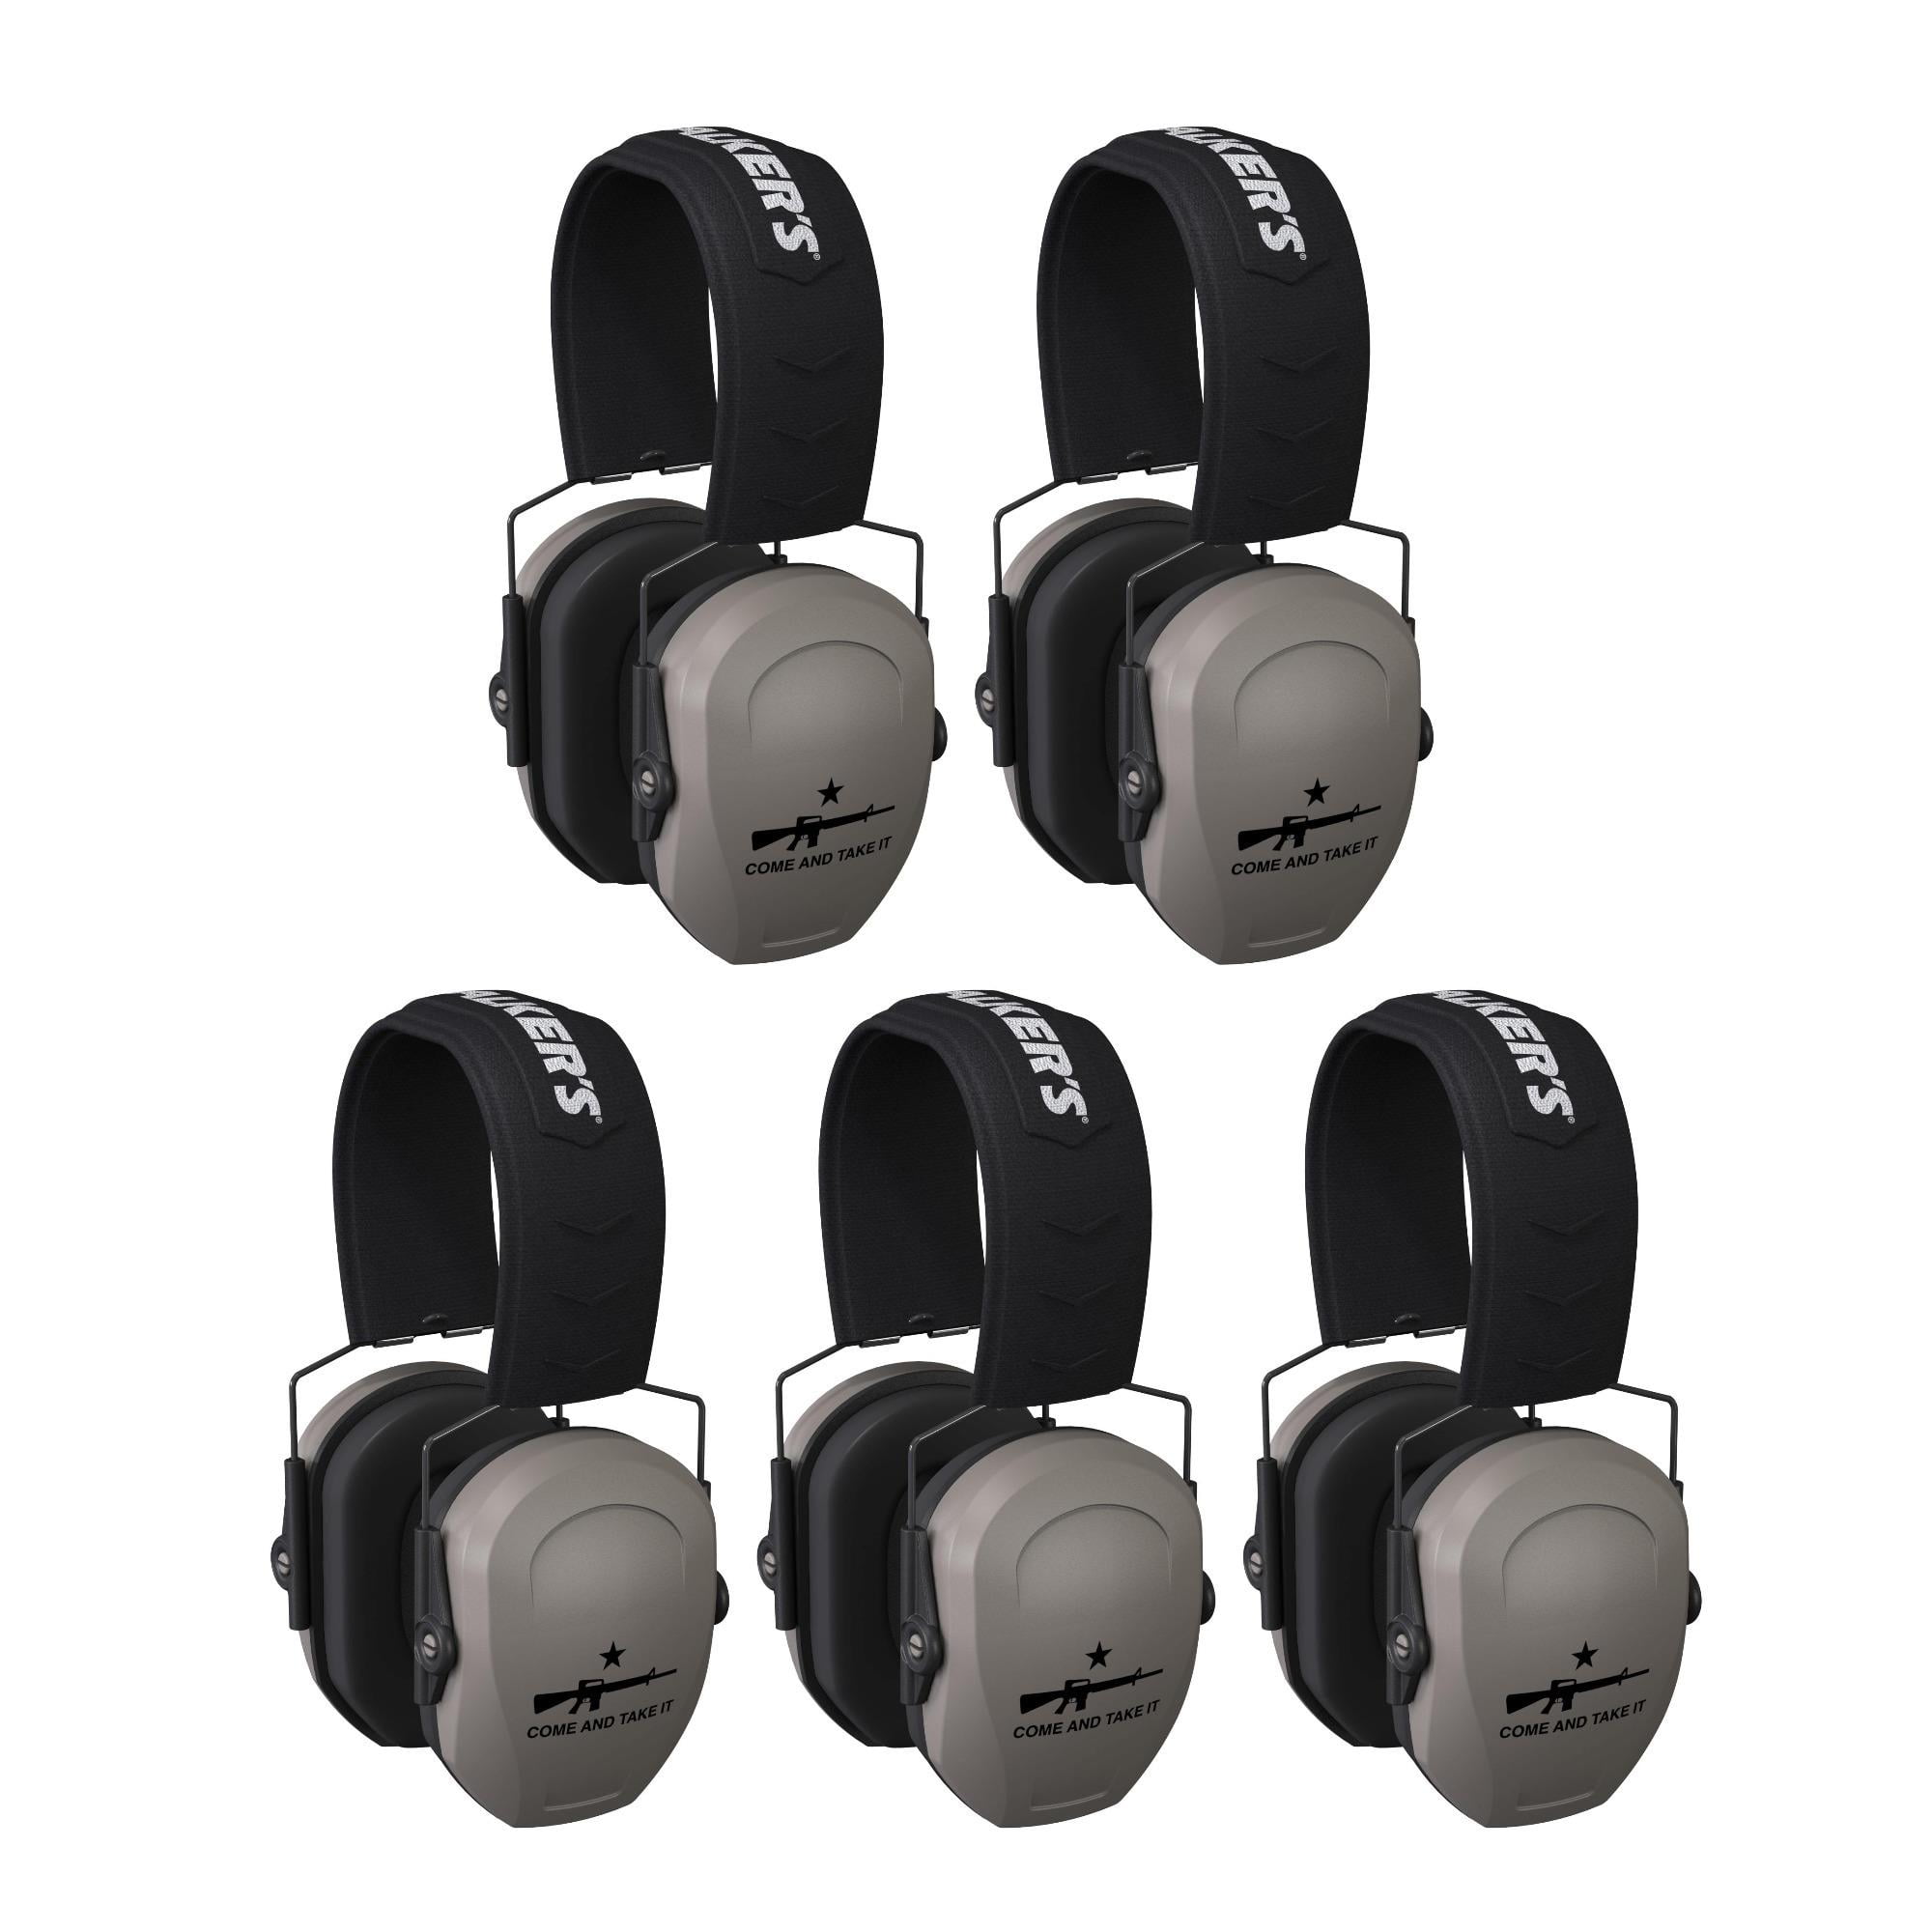 Walker's Razor Slim Passive Safety Ear Muffs Come and Take It 